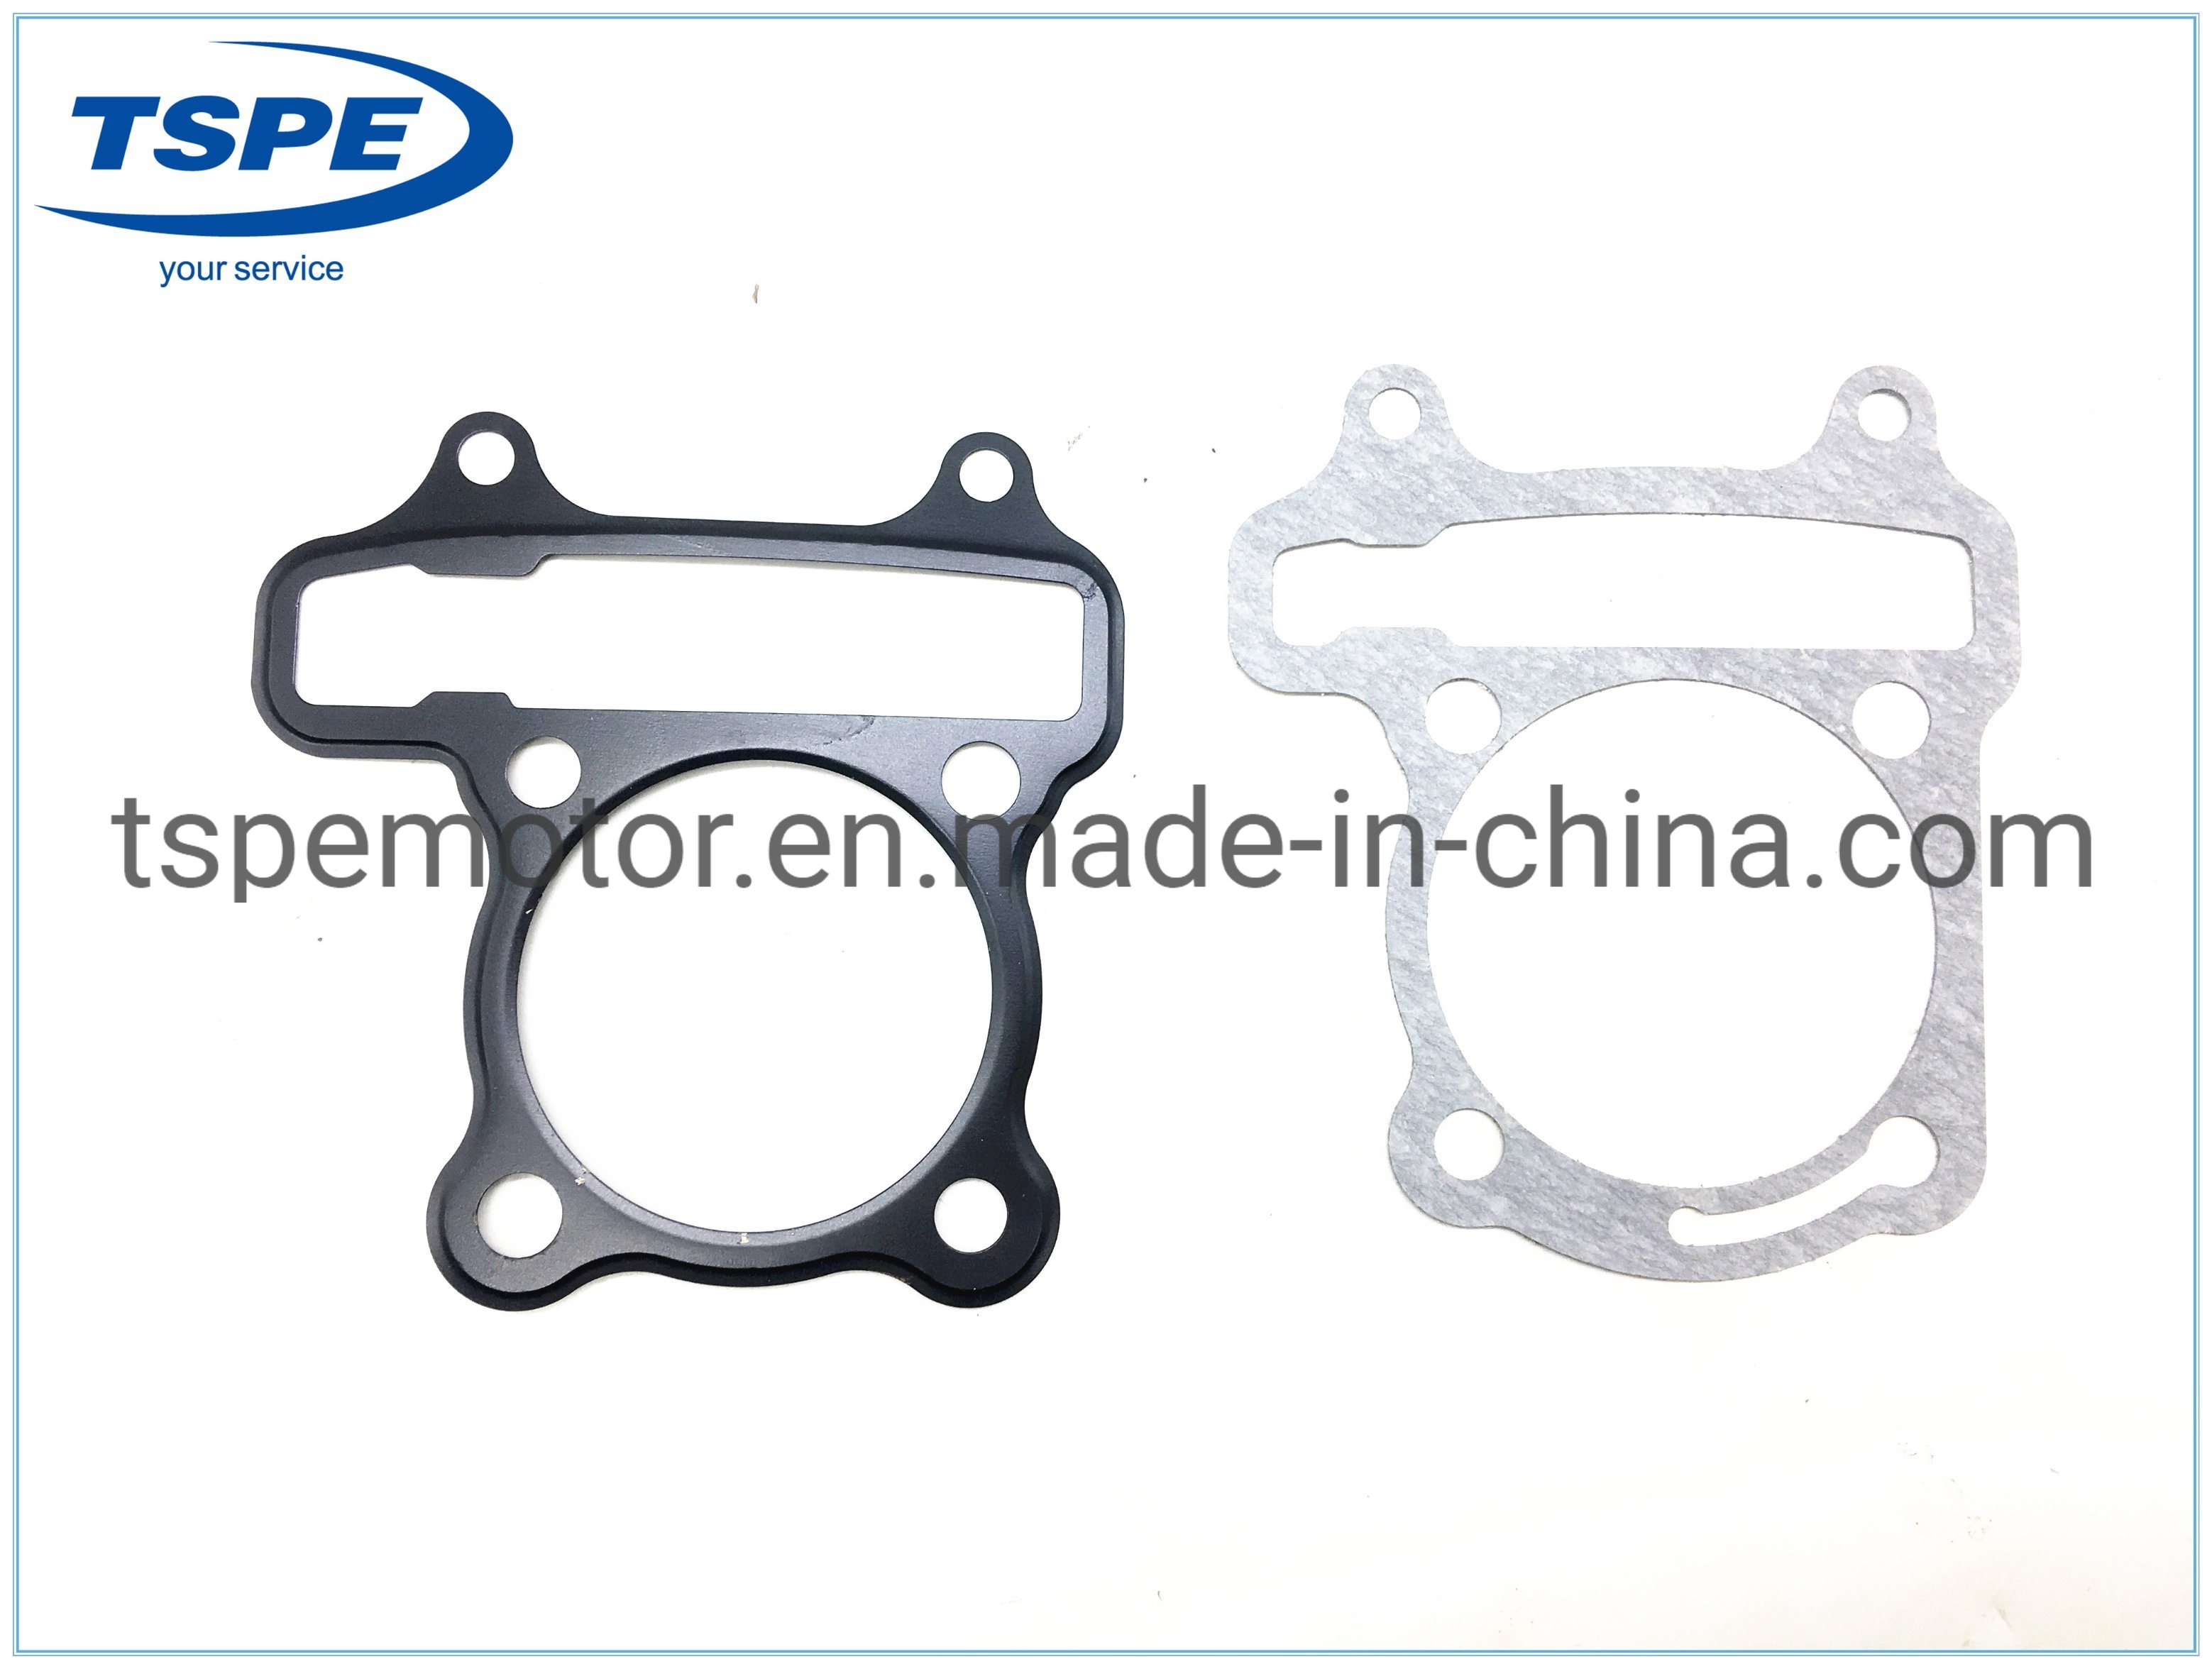 Motorcycle Parts Motorcycle Cylinder Head Gasket for Ds-150 Italika